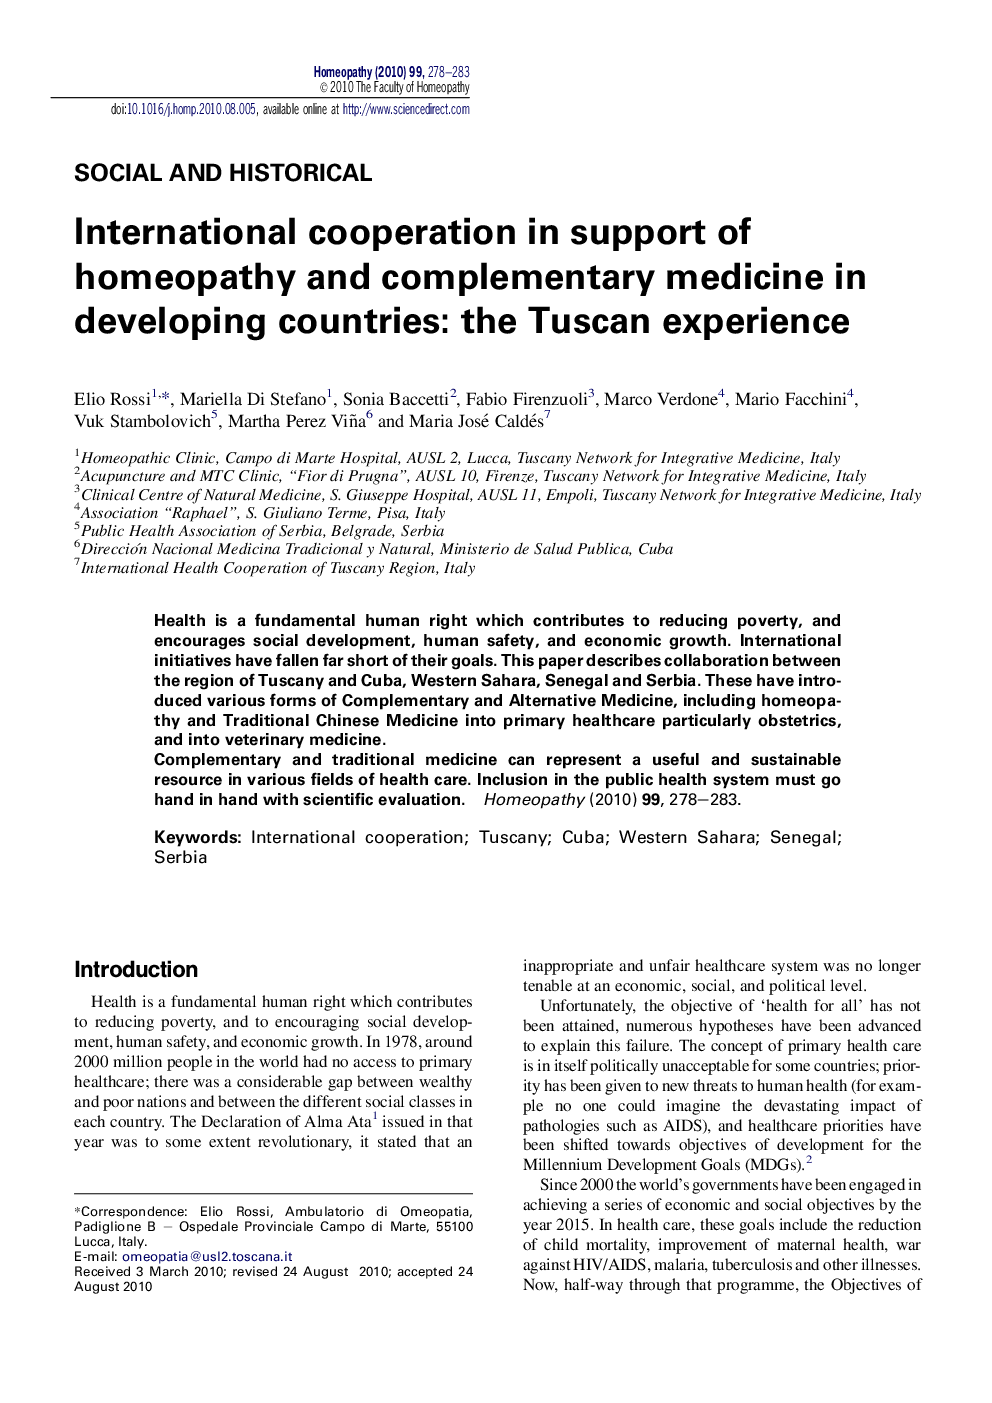 International cooperation in support of homeopathy and complementary medicine in developing countries: the Tuscan experience